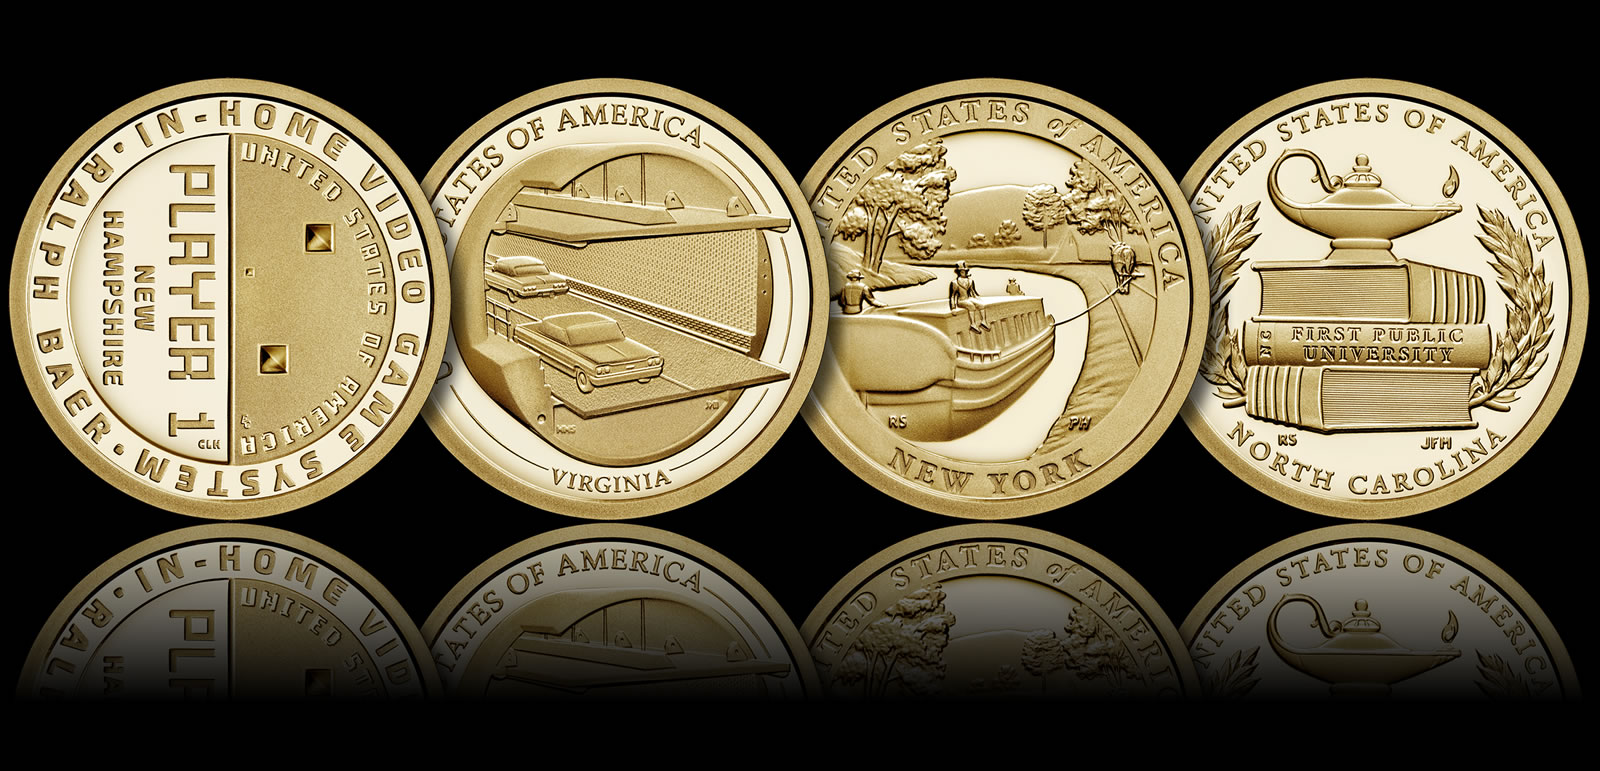 D American Innovation Chesapeake Bay Tunnel $1 Coin 2021 P P and D 2 Coin Set Uncircualted